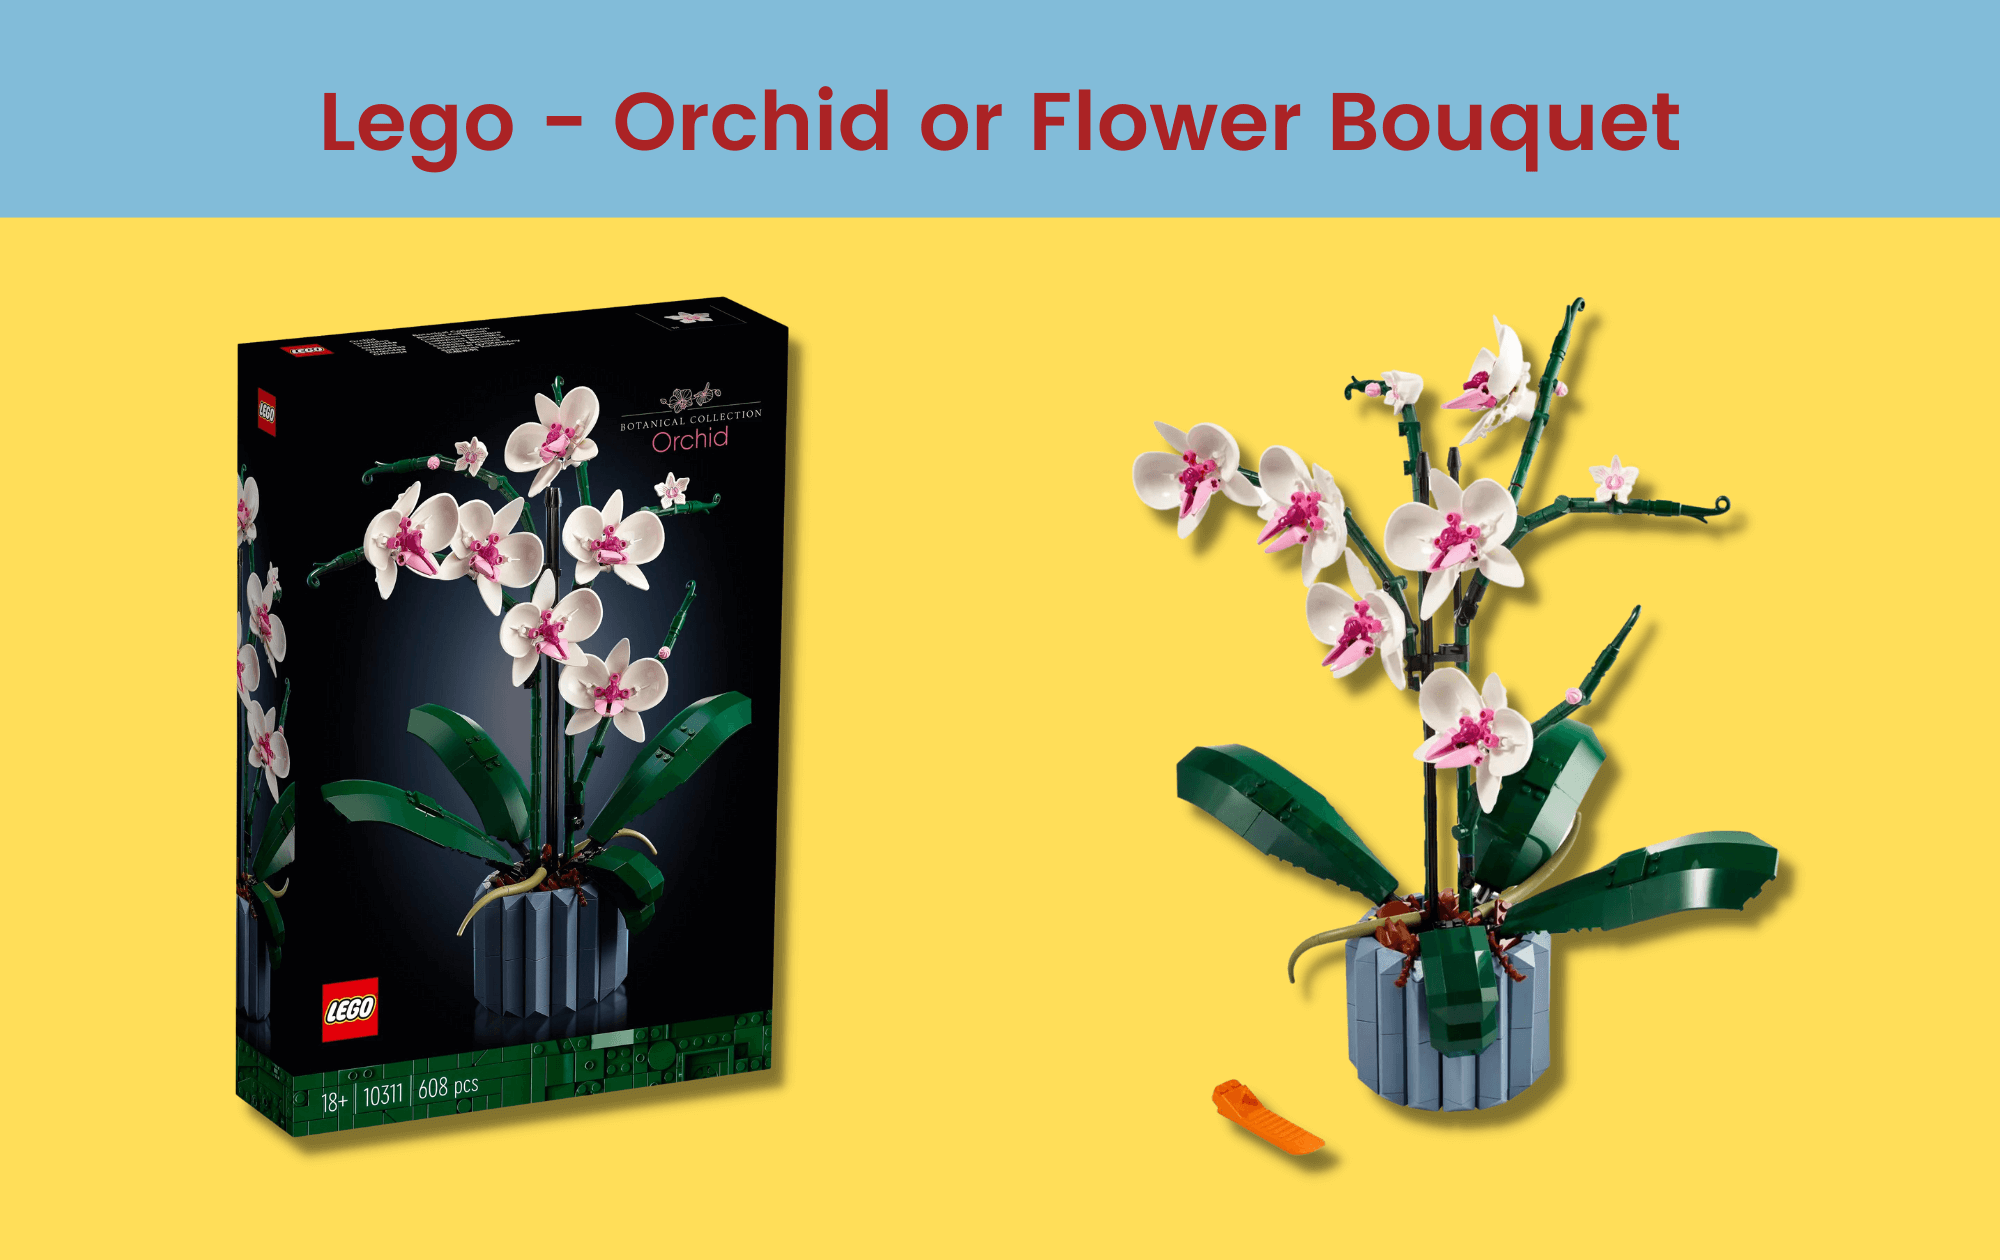 Lego - orchid or flower bouquet